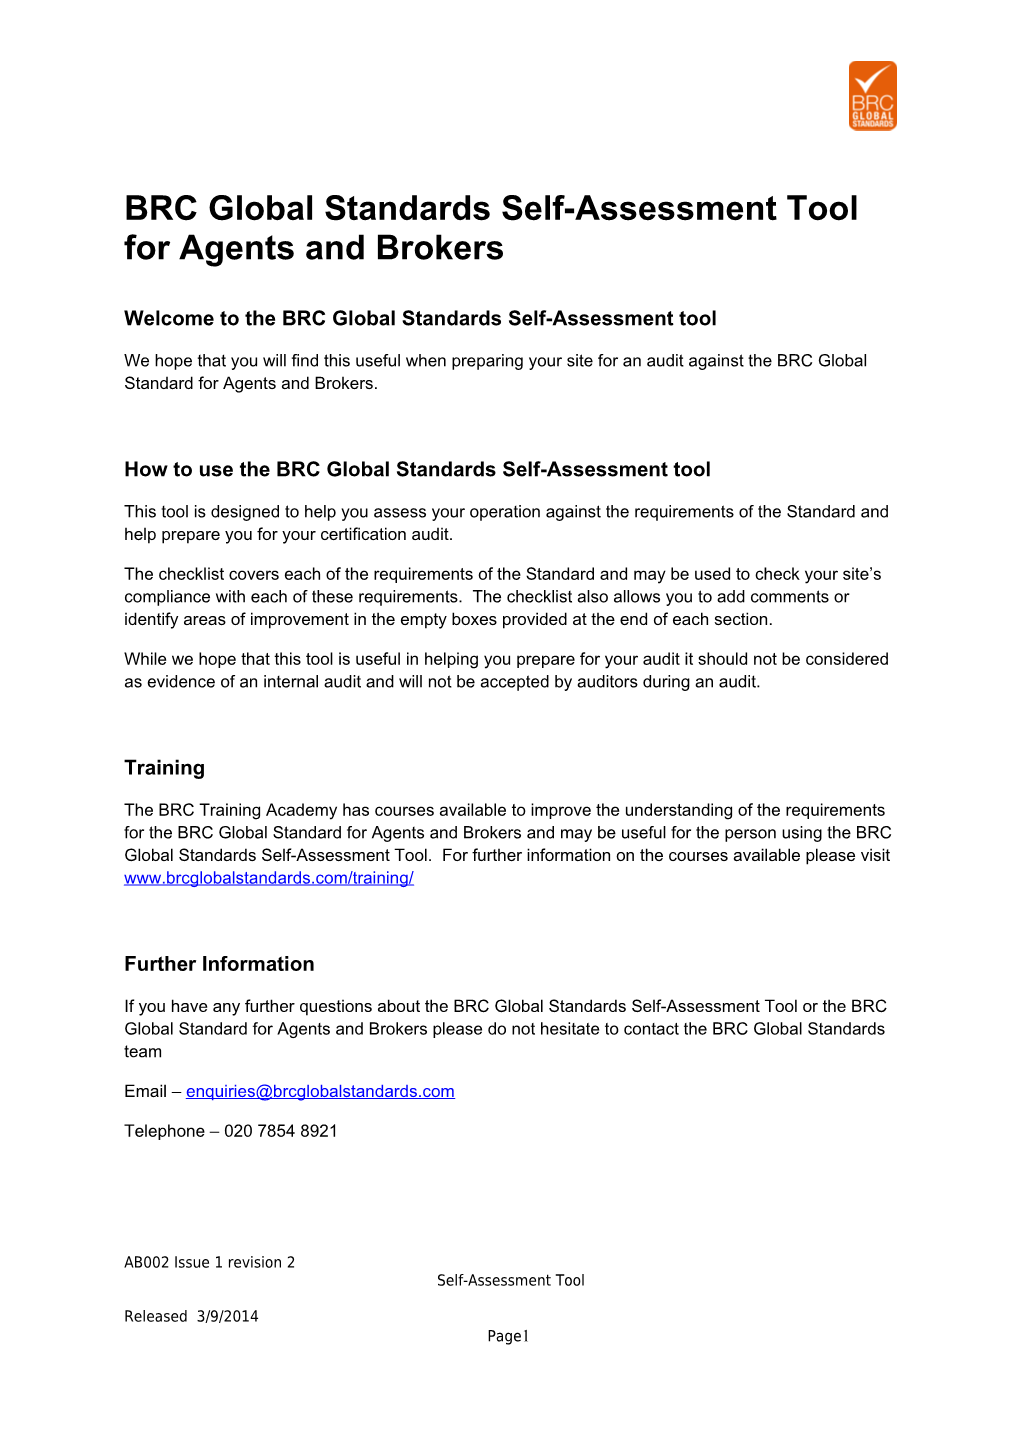 BRC Global Standards Self-Assessment Tool for Agents and Brokers